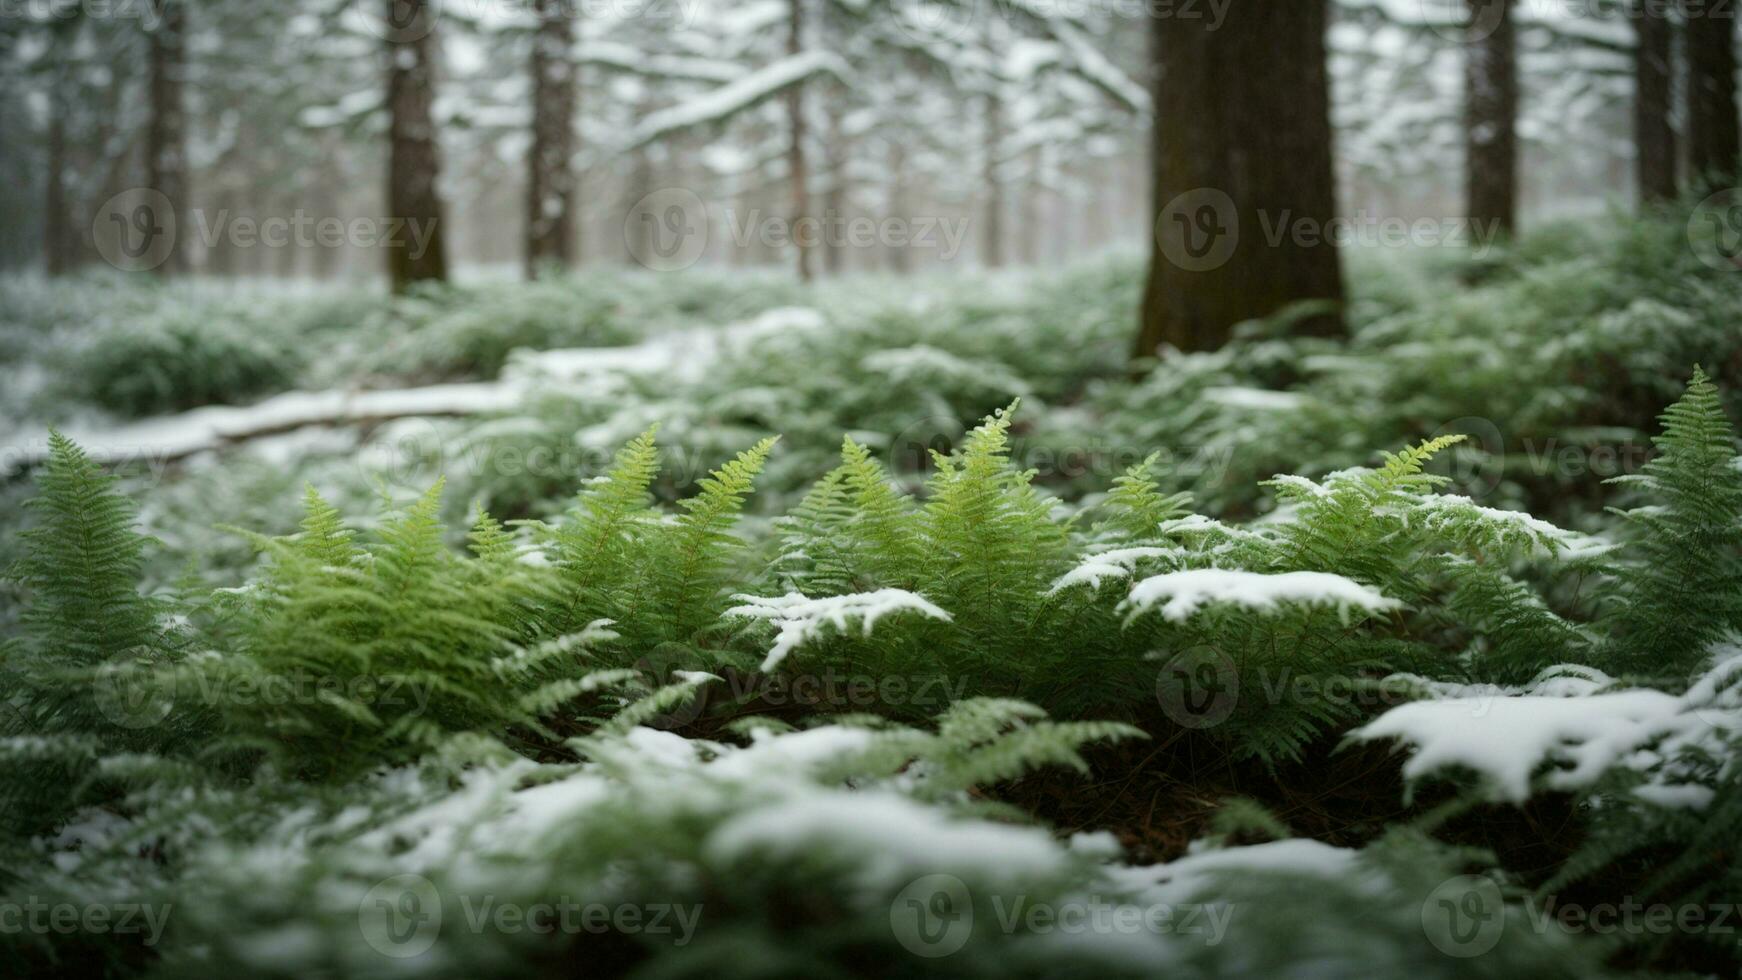 AI generated Explore the details of frost-kissed ferns and the understory vegetation beneath the winter trees, highlighting the contrast between the fragile greenery and the surrounding snowy landsca photo